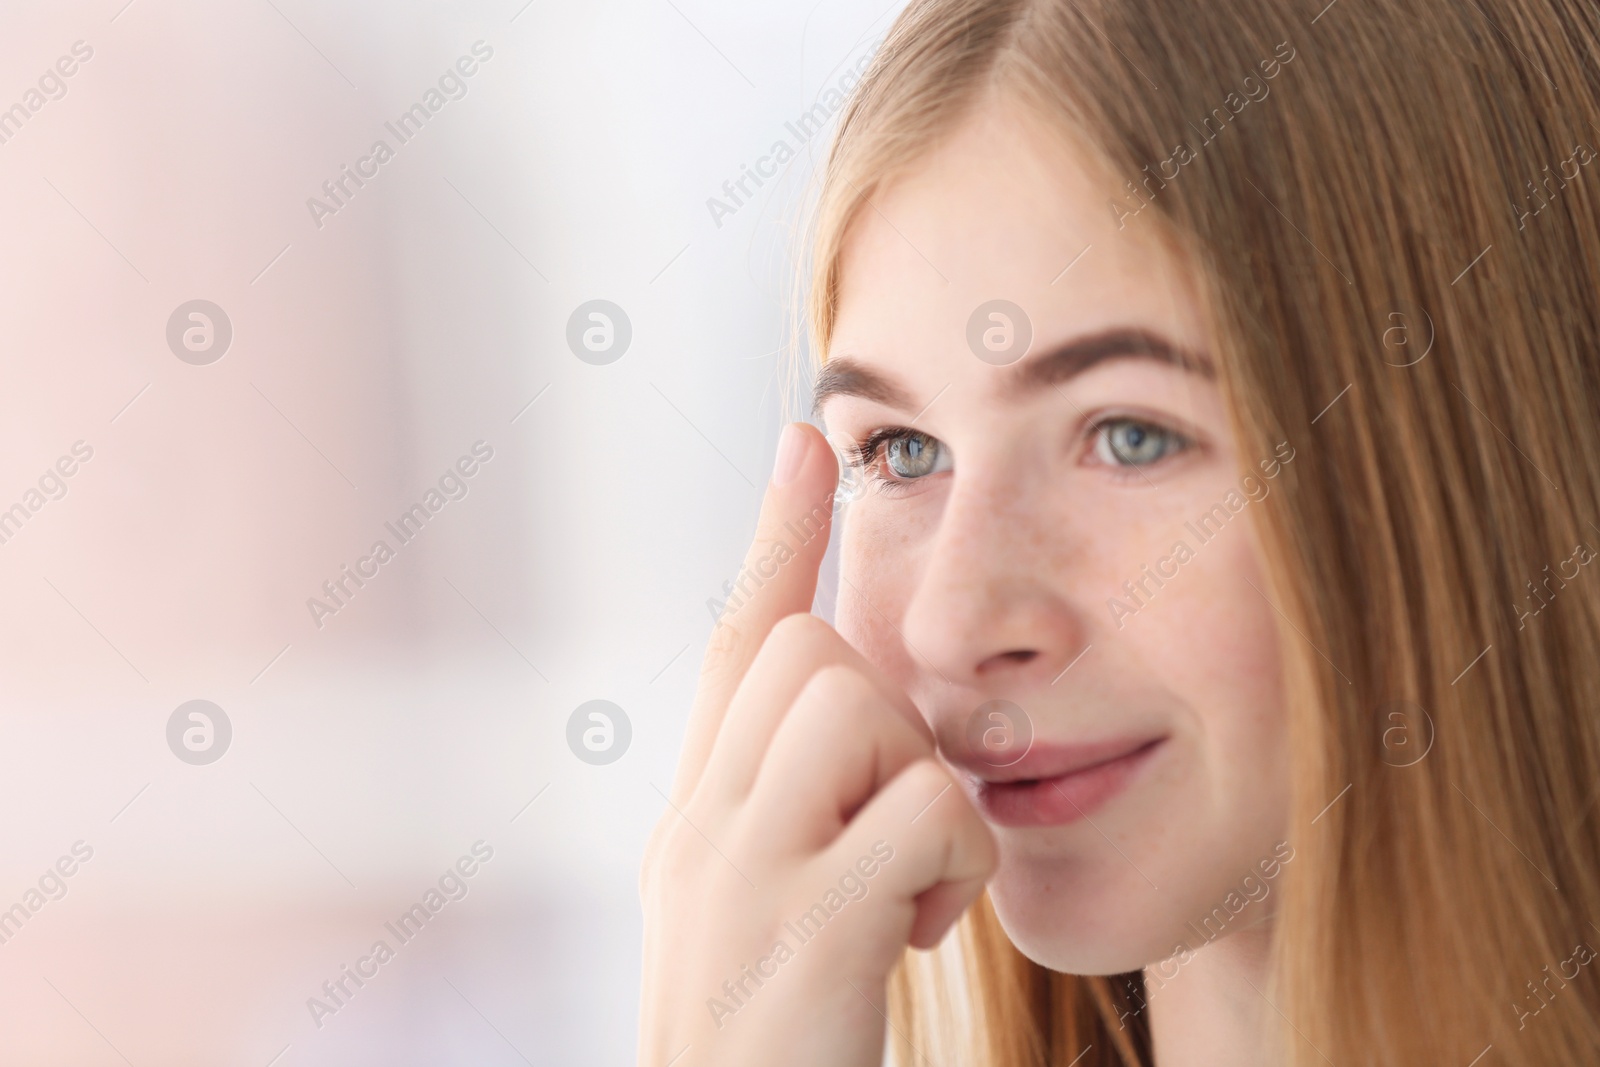 Photo of Teenage girl putting contact lens in her eye on blurred background